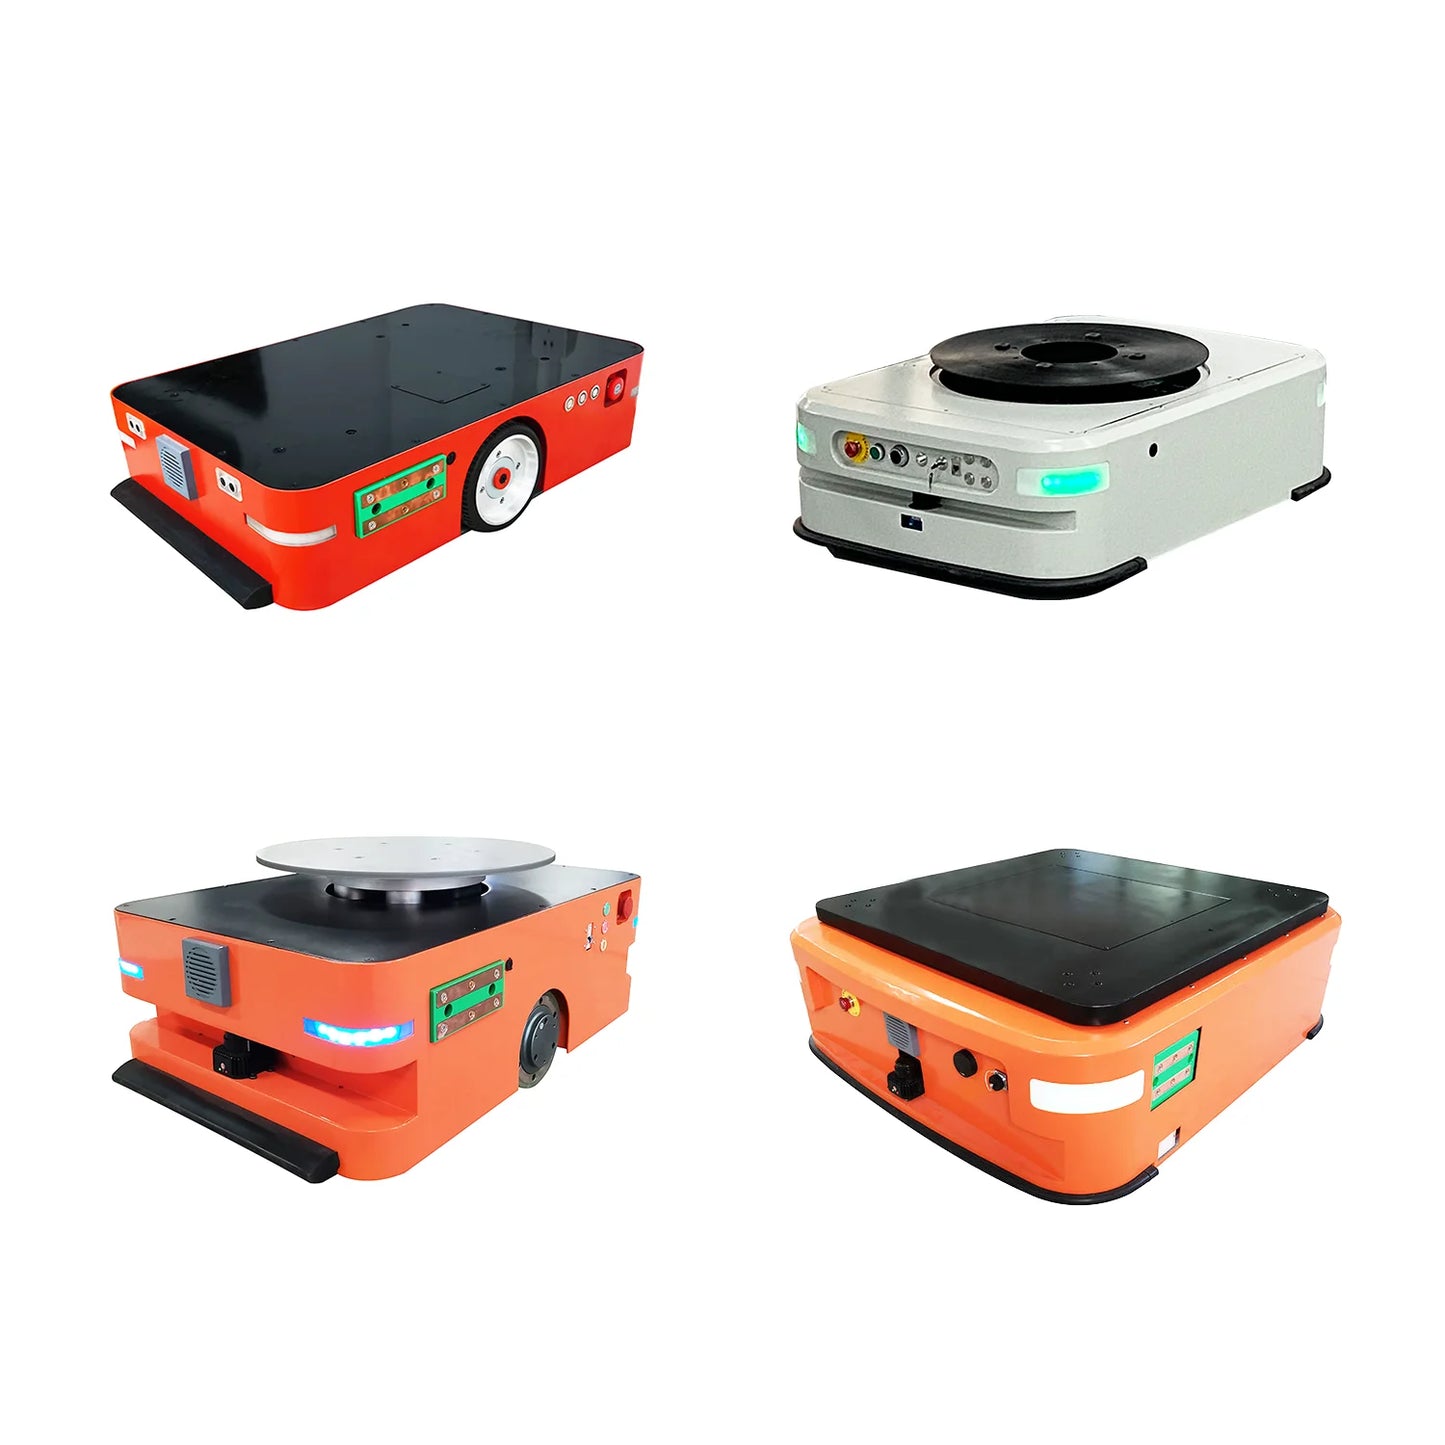 TZBOT 700kg load capacity magnetic navigation AGV robot with hree-level obstacle avoidance industrial agv car